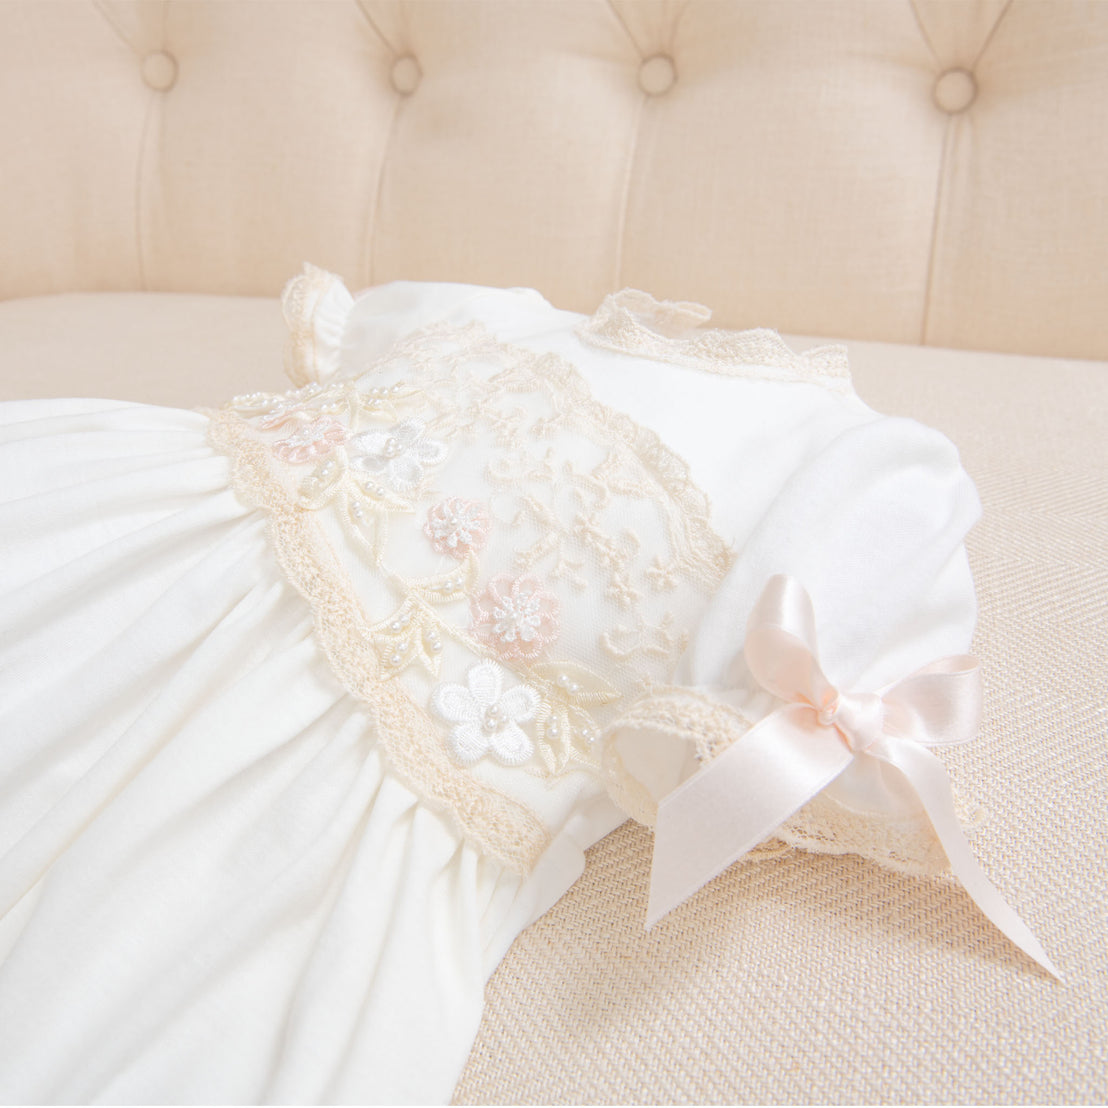 A close-up of the bodice on the Jessica Newborn Gown featuring delicate lace and floral embroidery, adorned with a pink bow on the sleeves, displayed on a soft beige couch.